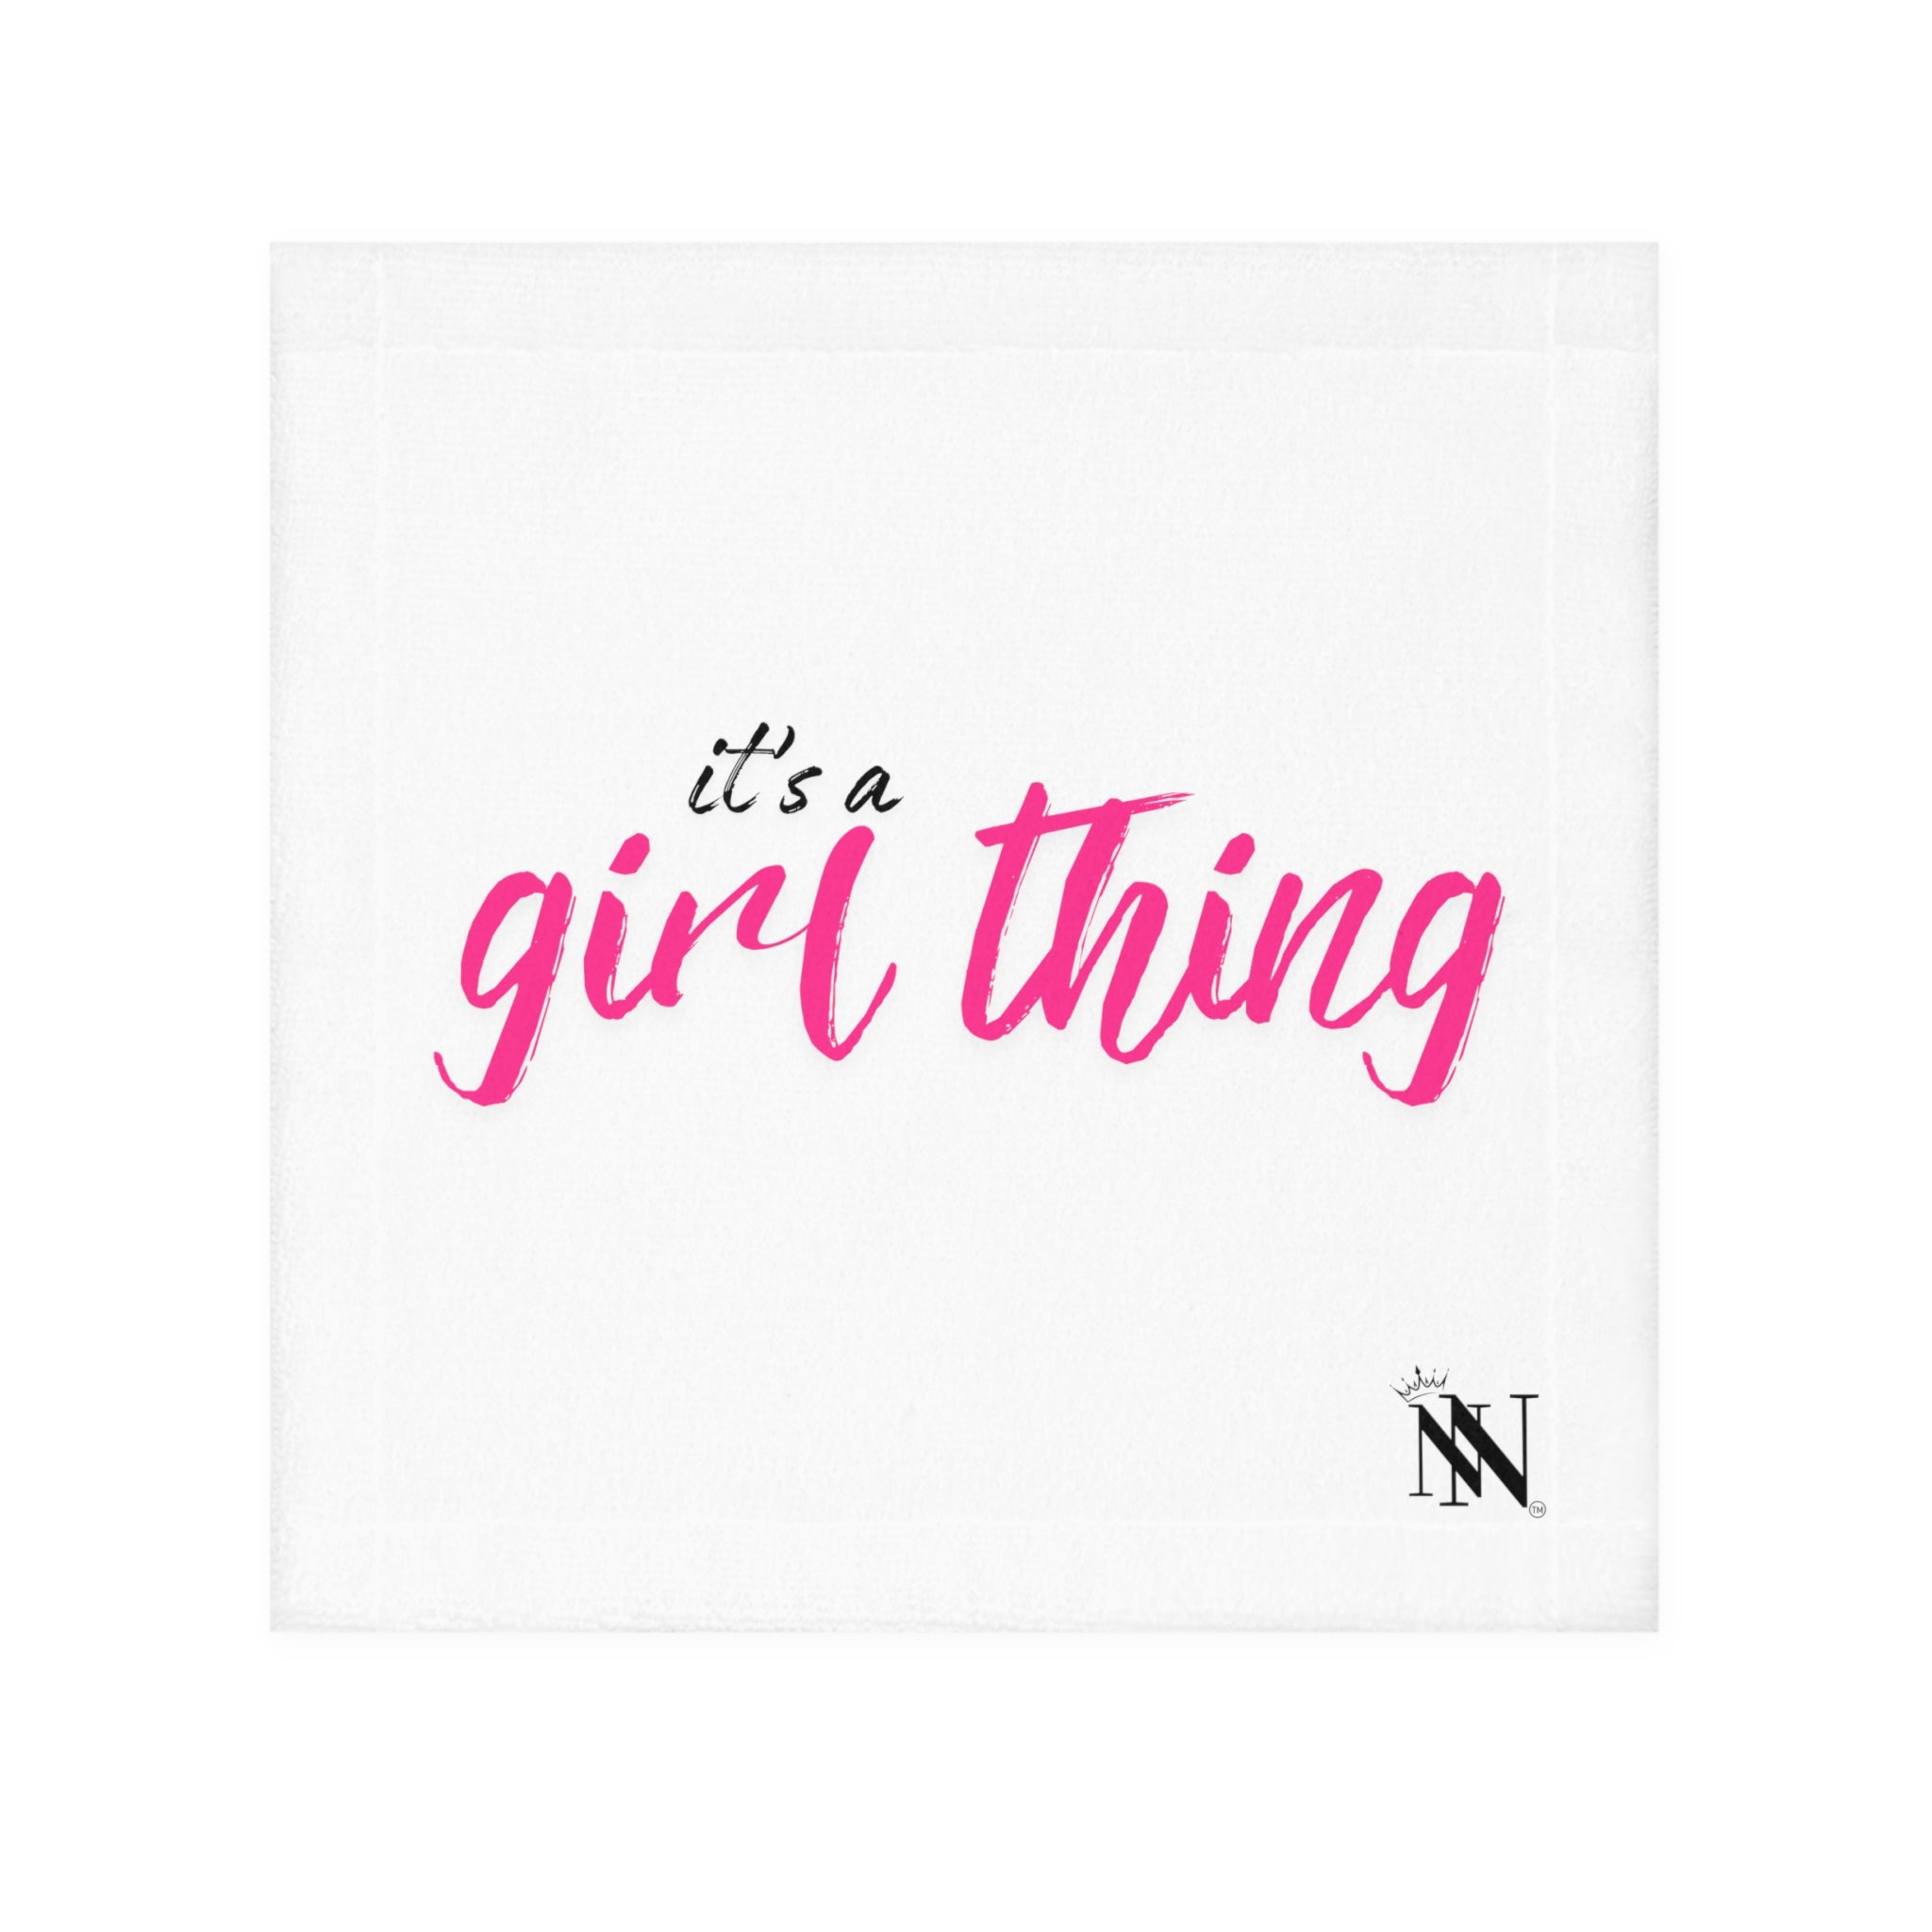 It's a girl thing sex towel